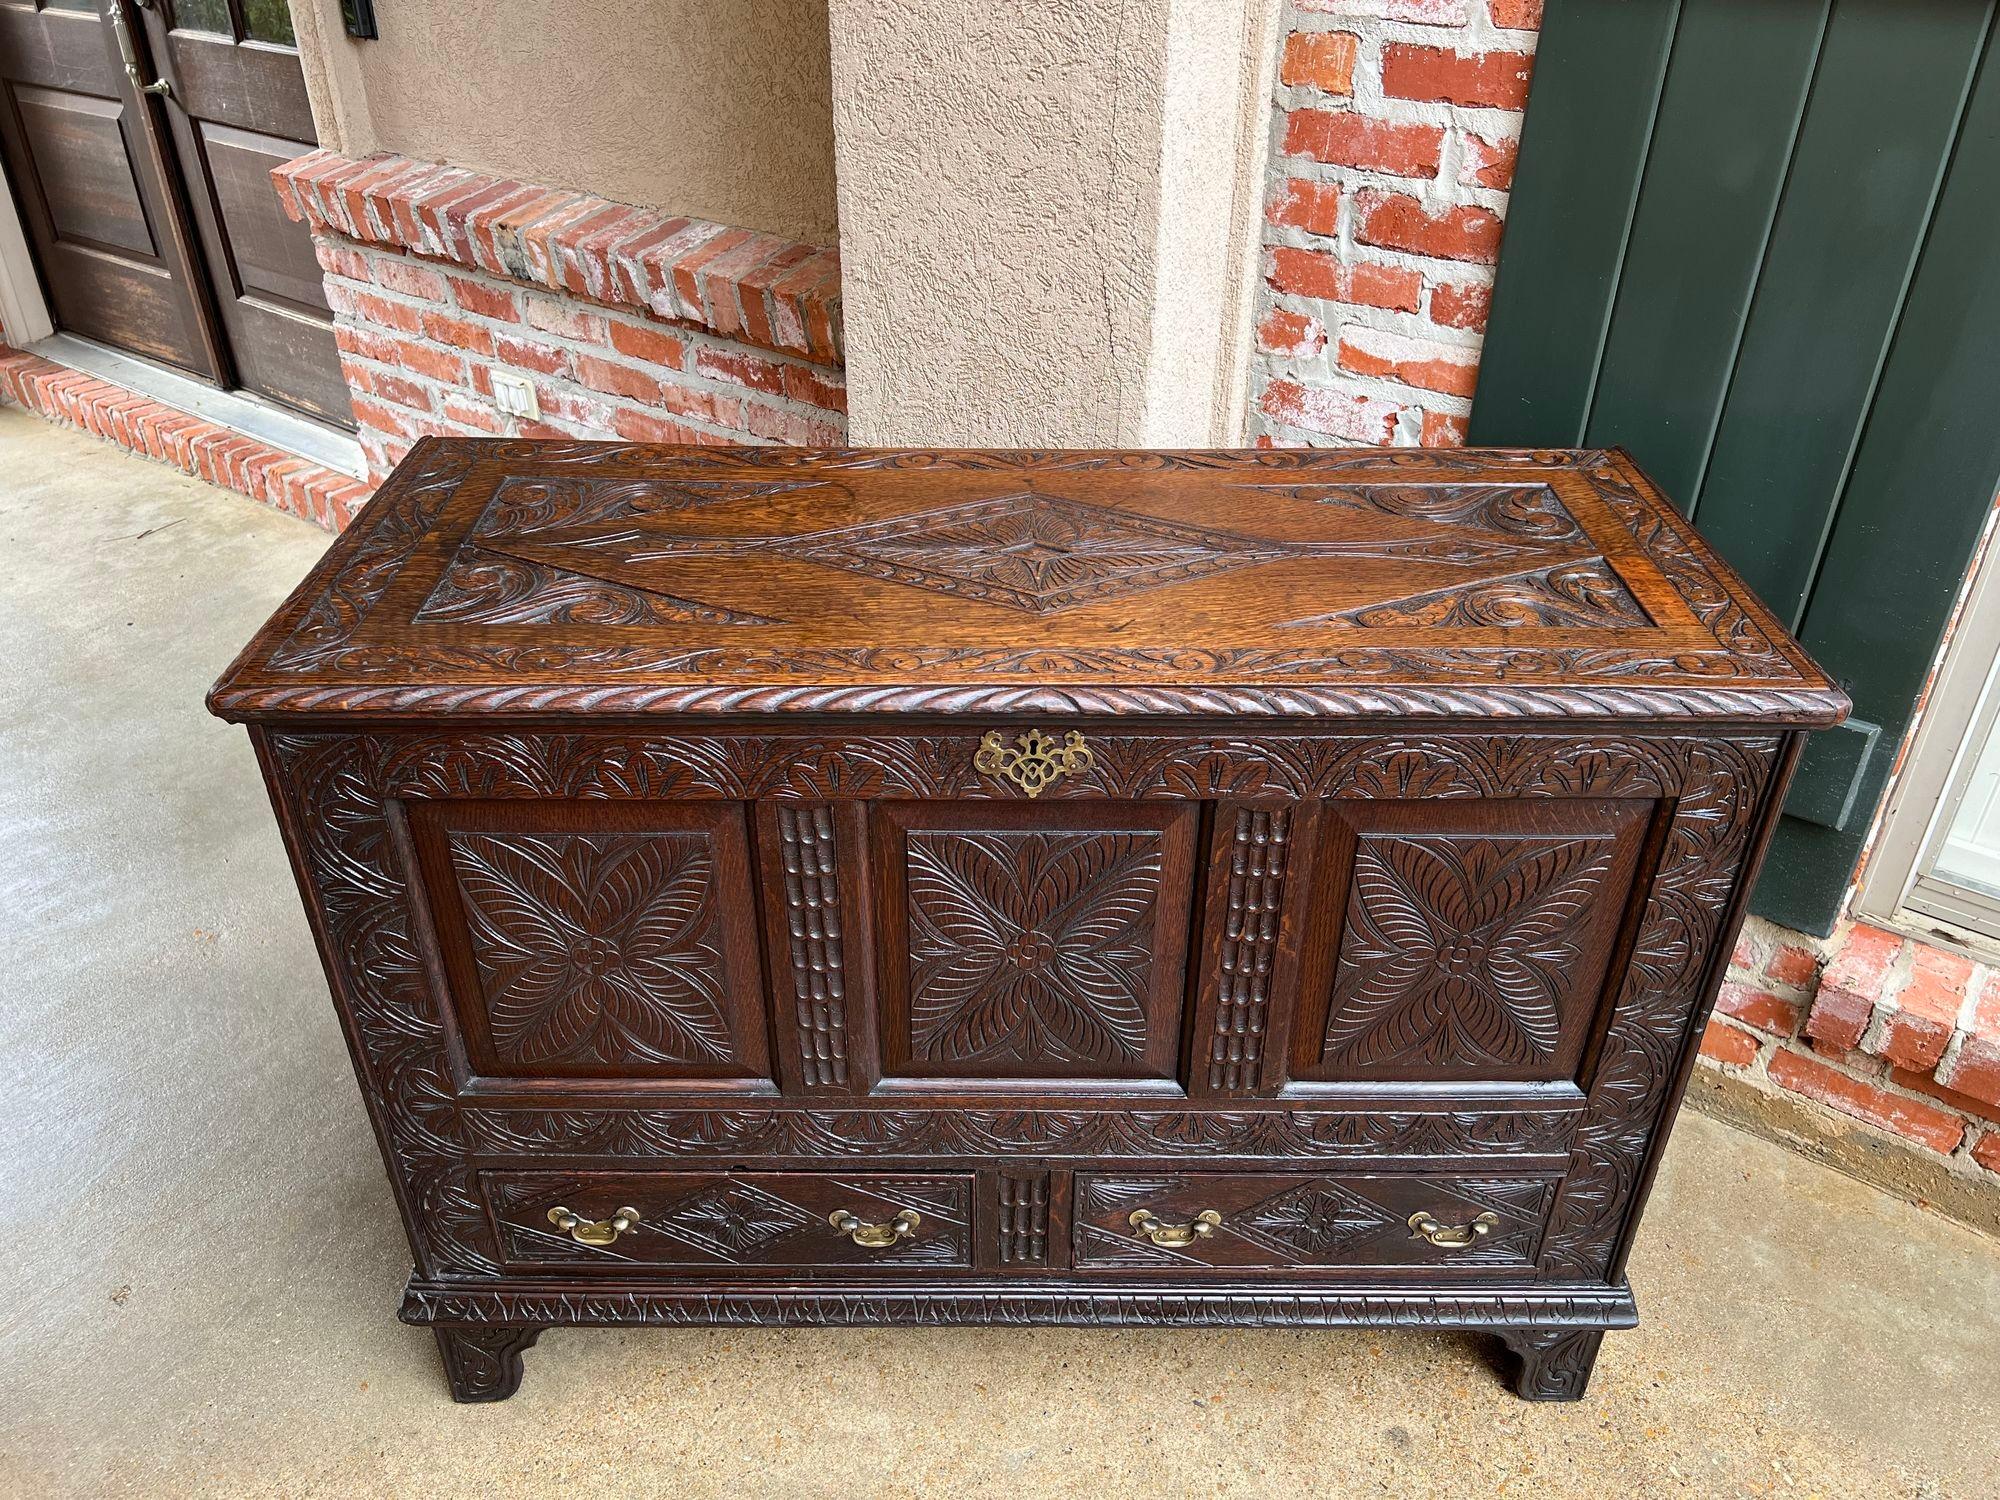 Hand-Carved Antique English Trunk Coffer Blanket Chest Carved Oak Foyer Table Wedding Chest For Sale